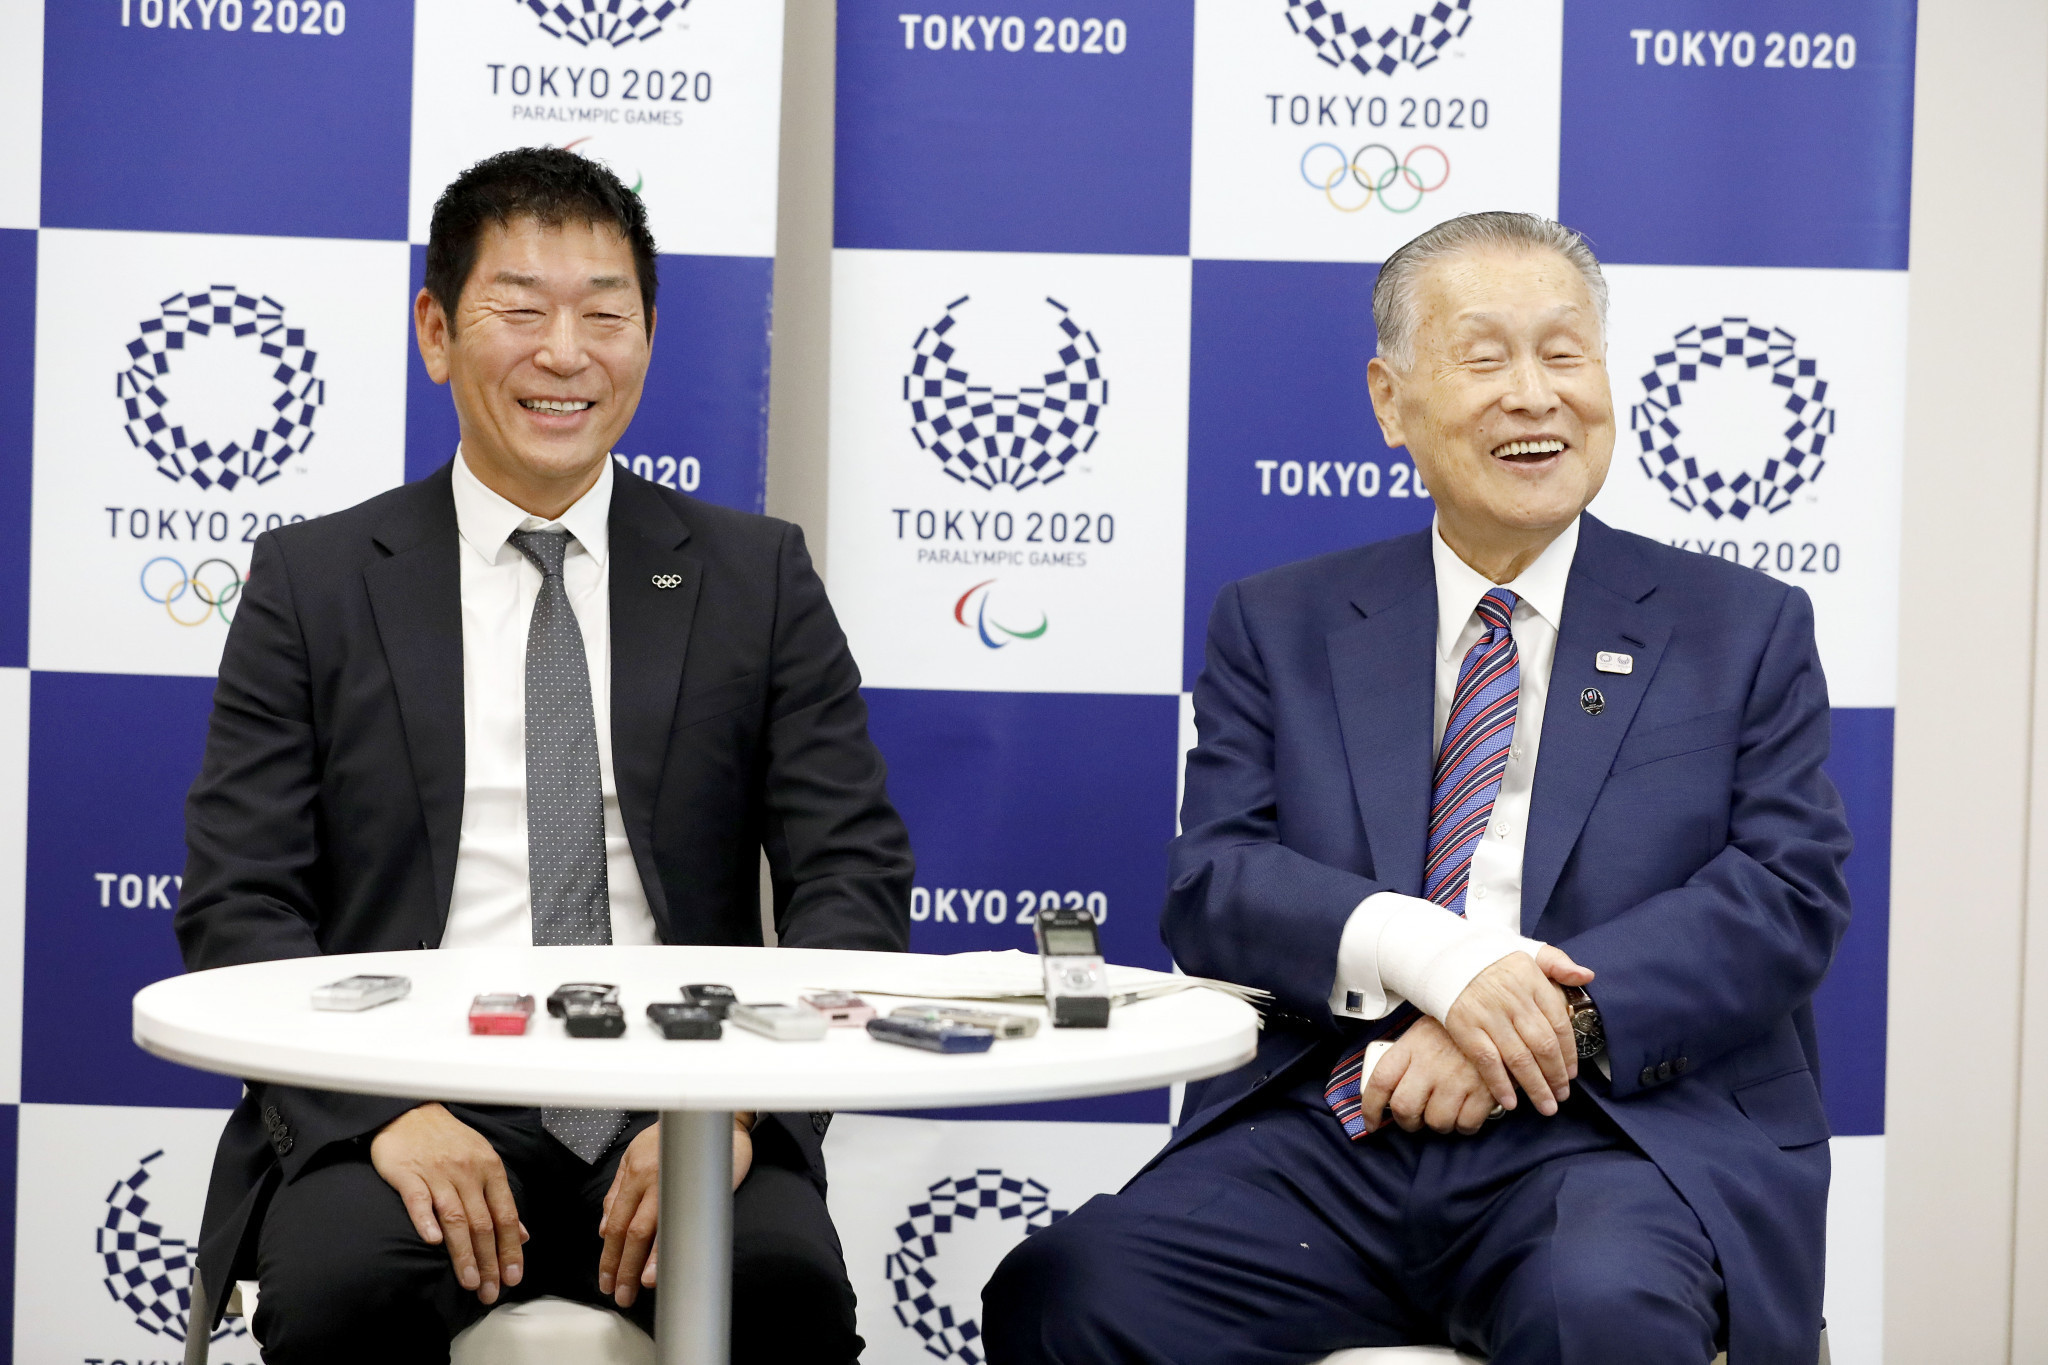 Morinari Watanabe, pictured here with Tokyo 2020 President Yoshirō Mori, accepted an invitation to become a Tokyo 2020 Executive Board member in October ©Tokyo 2020